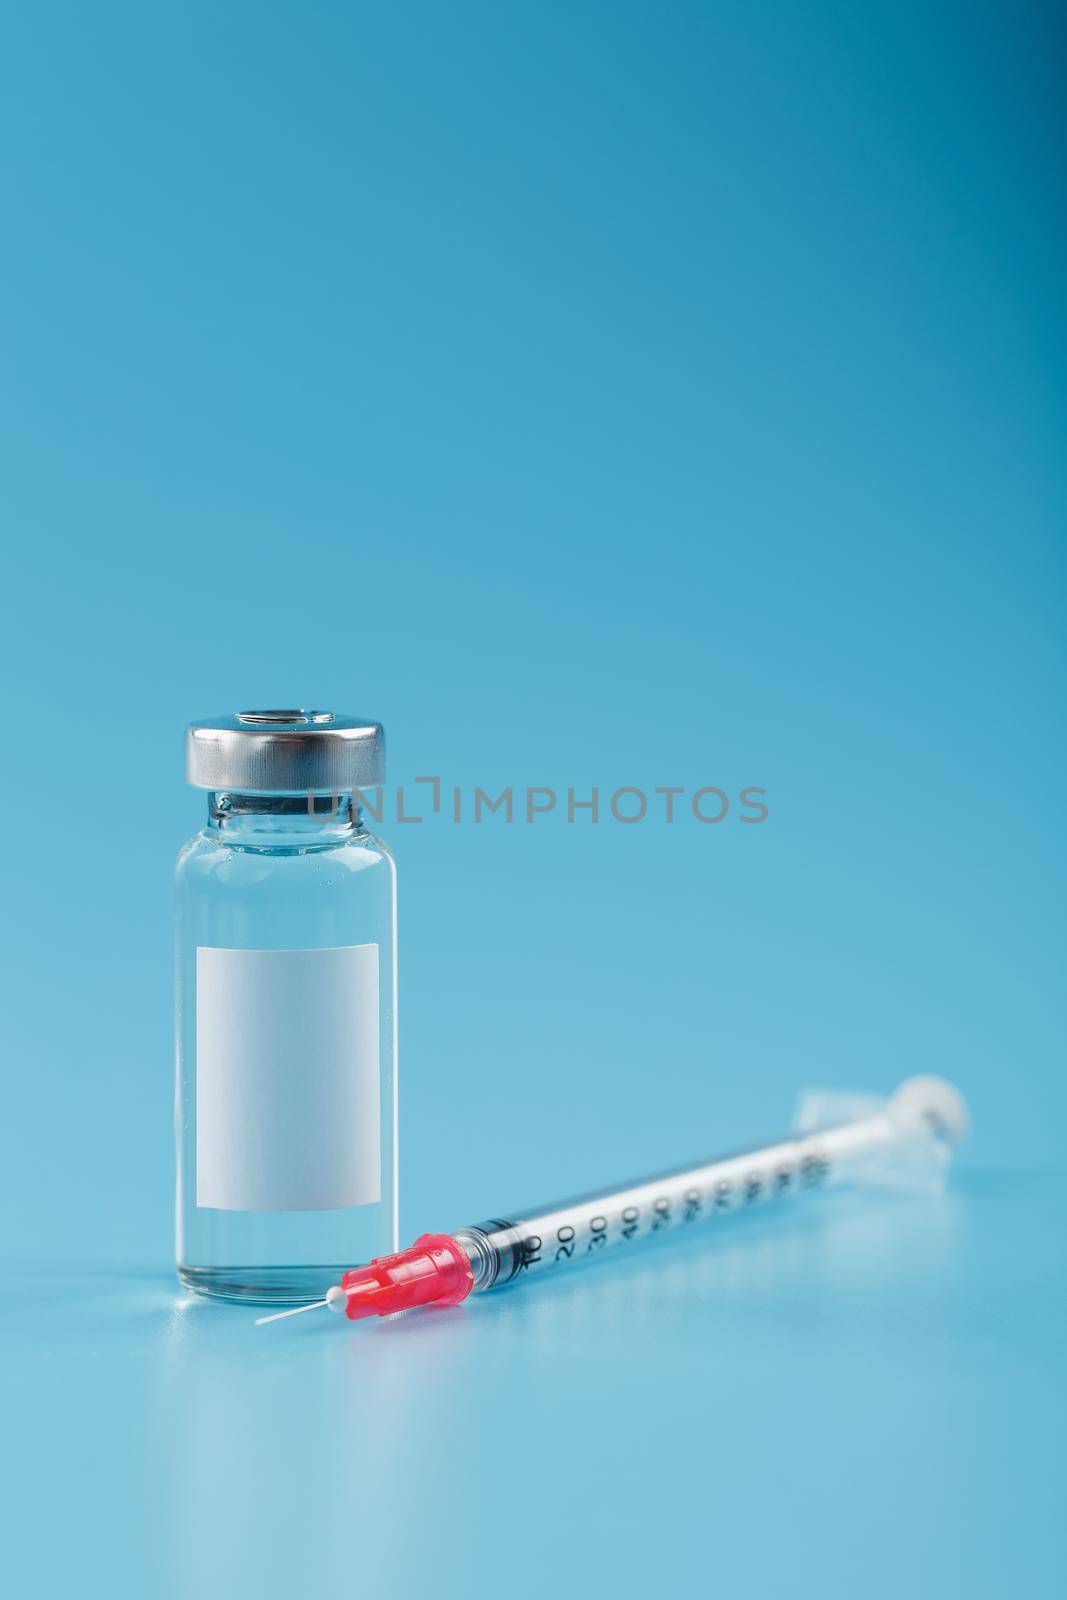 Syringe and ampoule with a vaccine against viruses and diseases on a blue background. by AlexGrec